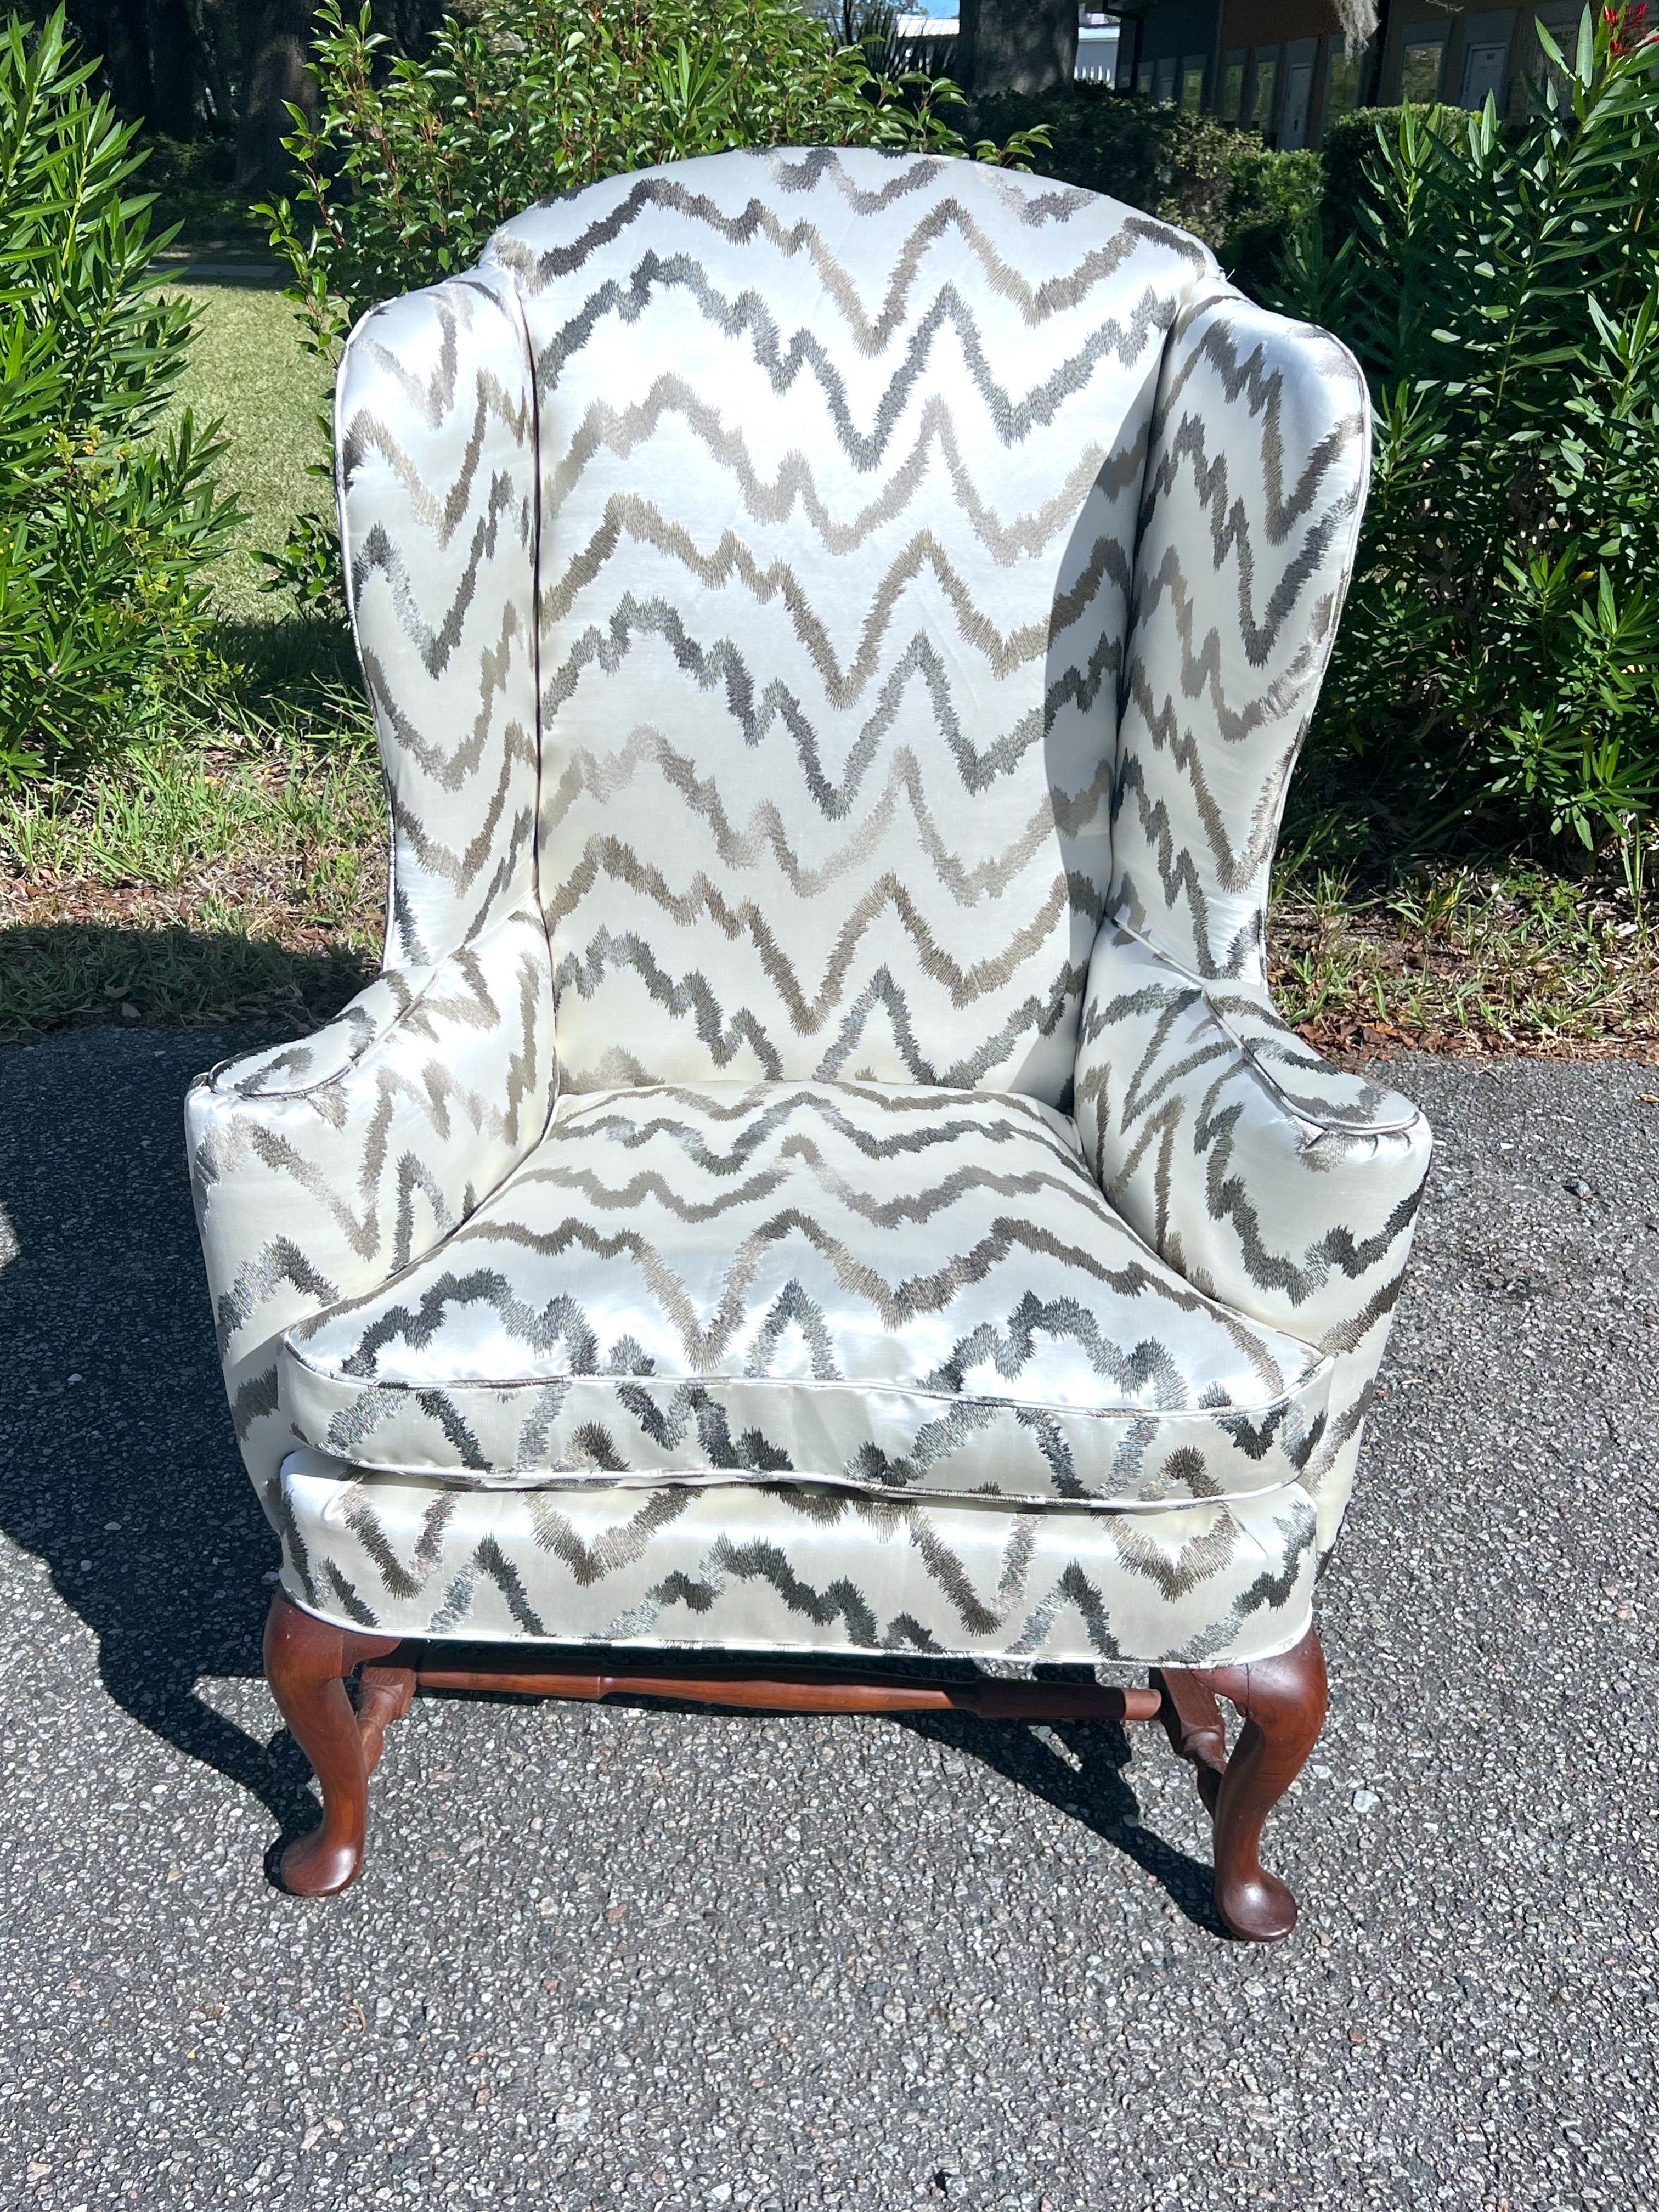 Made from Mahogany frame with carved cabriole legs in front and square splayed legs at back. Lets are connected by a turned H-stretcher, newly upholstered in Donghia Fabric.  

DONGHIA EMBROIDERED ZIG ZAG SILK SATIN FABRIC RODEO SILVER COLORWAY: